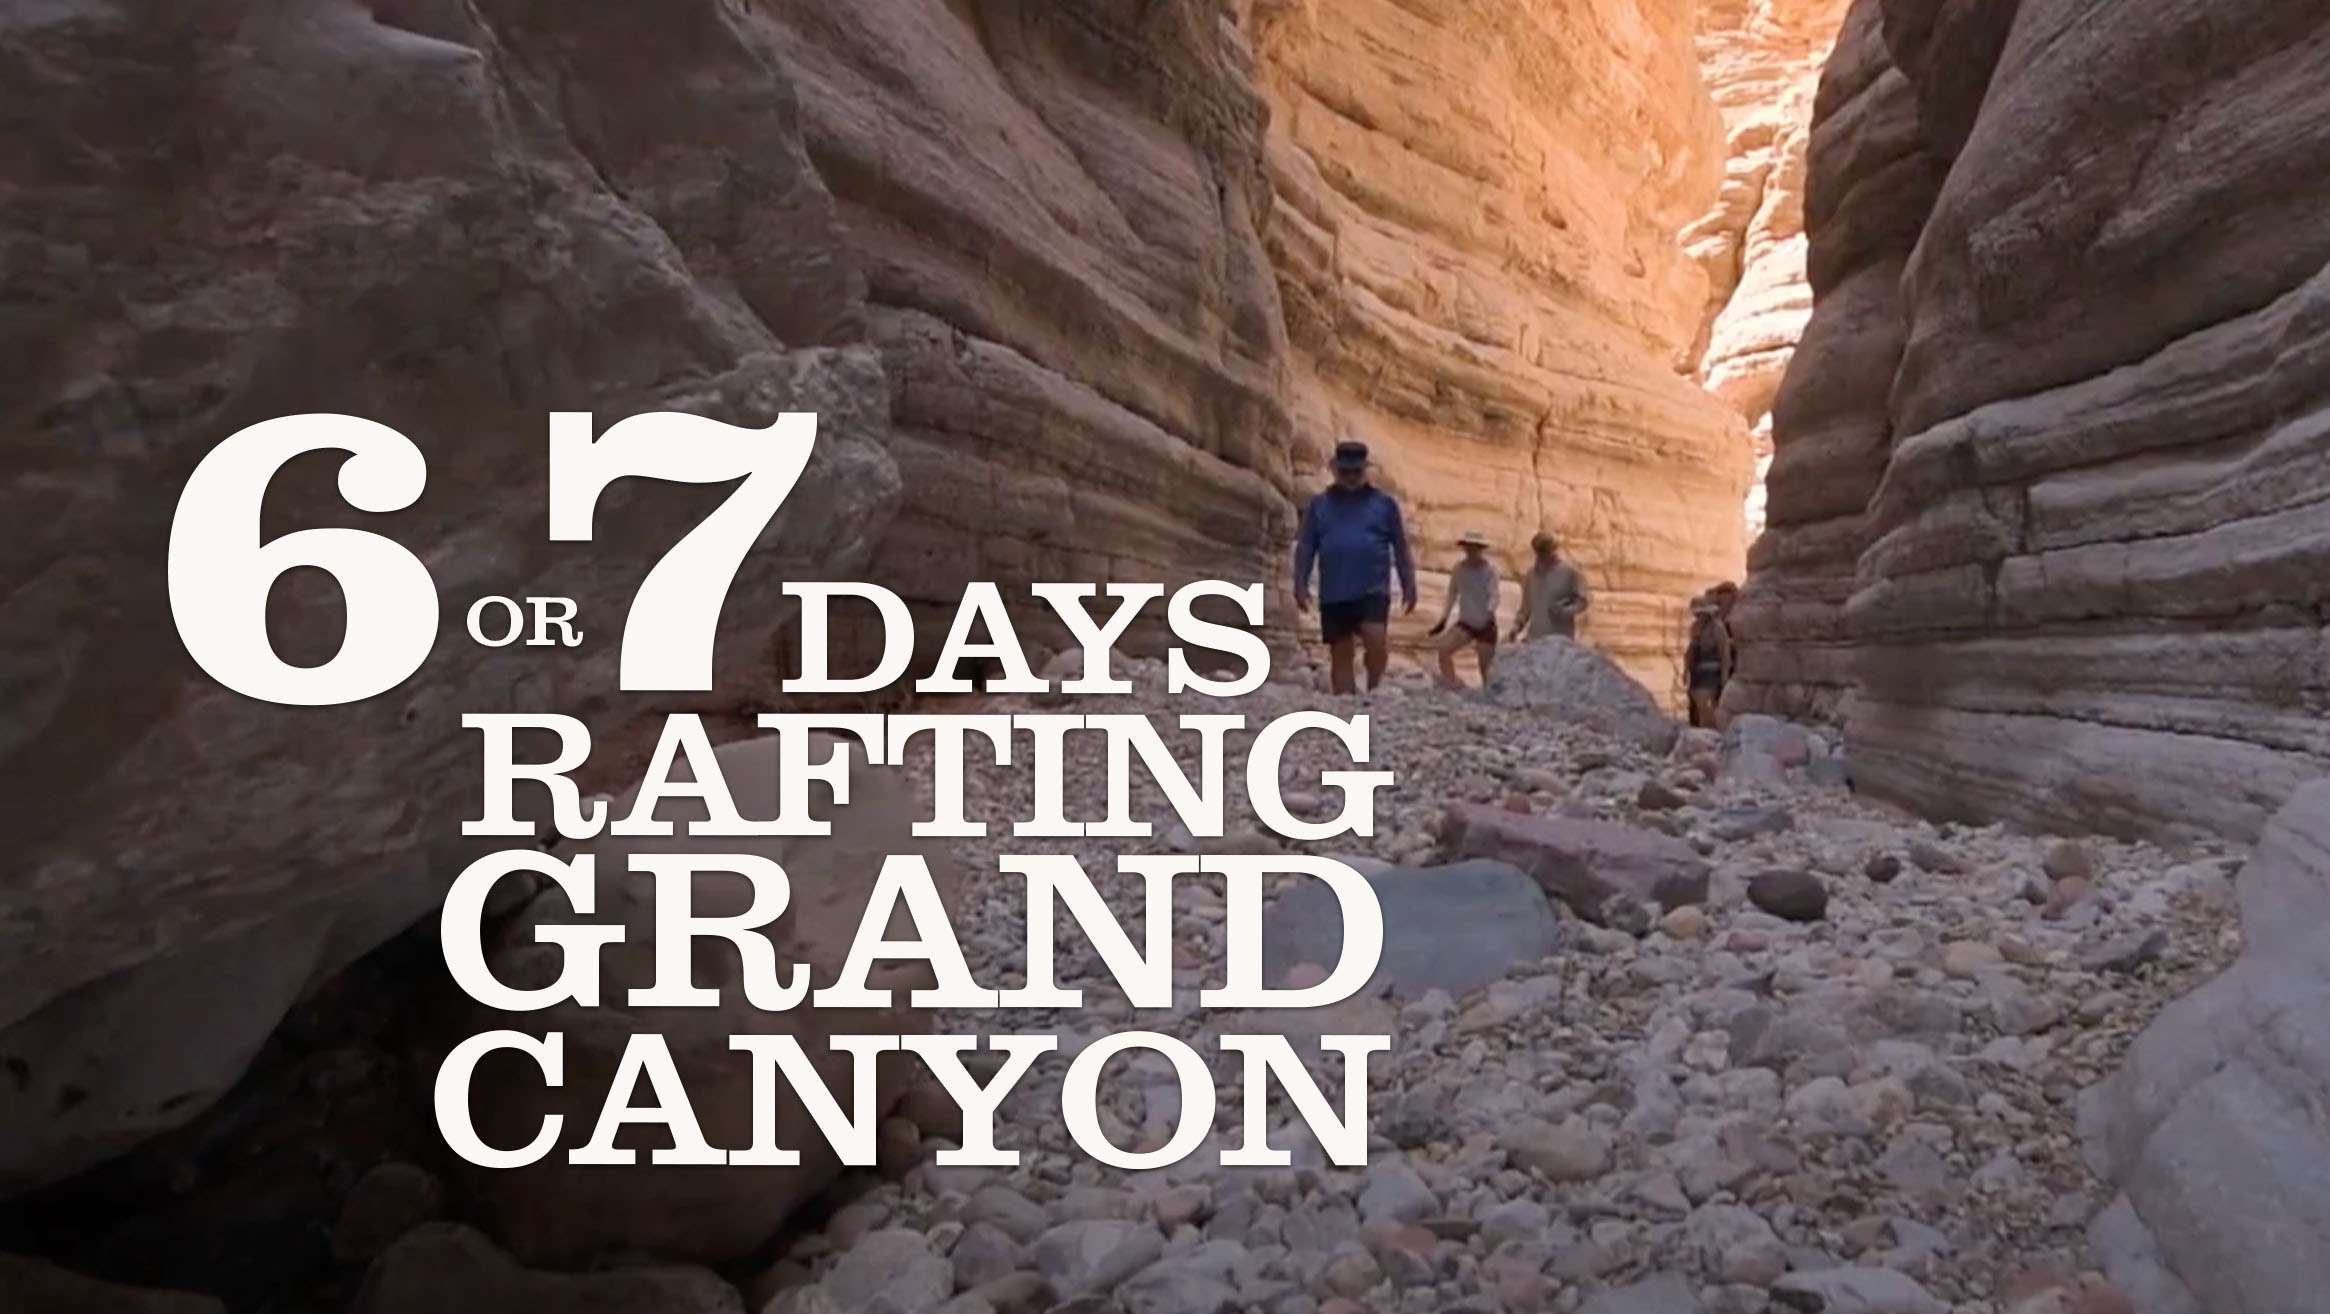 6-7 Days Rafting in Grand Canyon